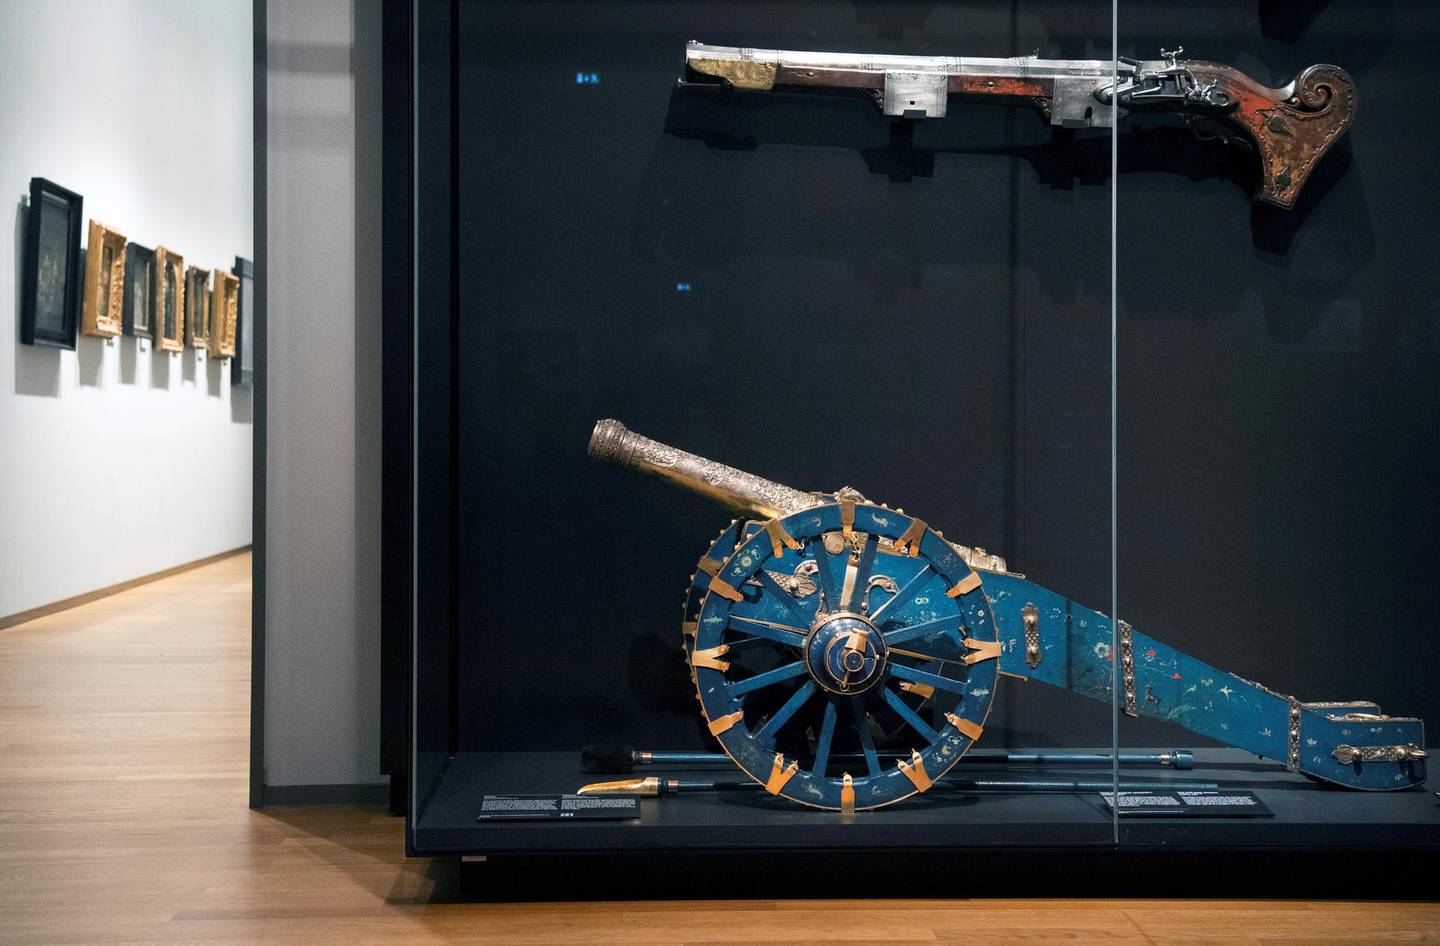 A 1765 cannon that belonged to the King of Kandy (Sri Lanka) is displayed at the Rijksmuseum in Amsterdam, Netherlands October 10, 2020. Picture taken October 10, 2020. REUTERS/Piroschka van de Wouw